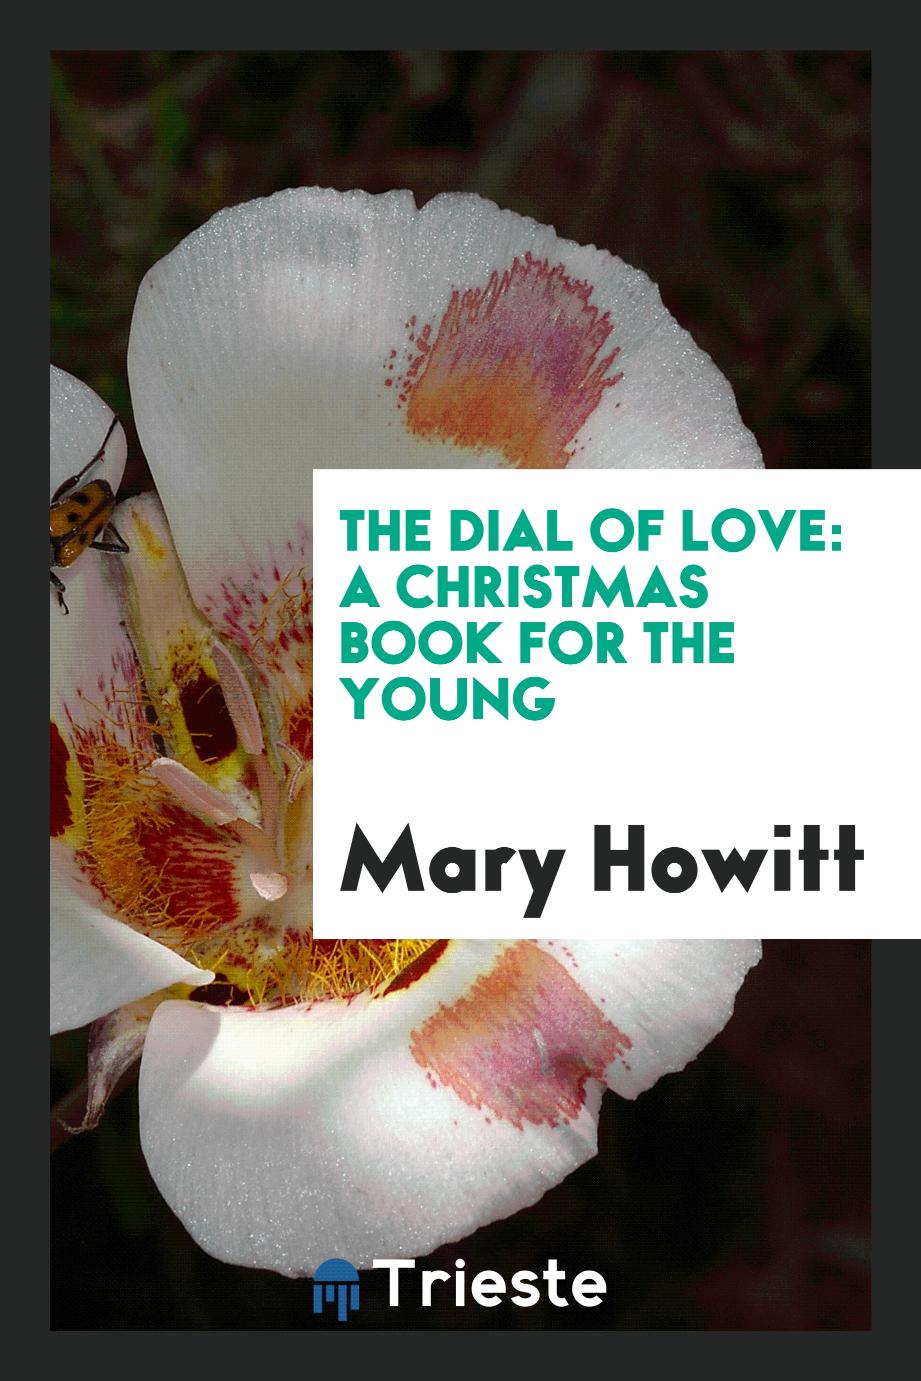 The dial of love: a Christmas book for the young